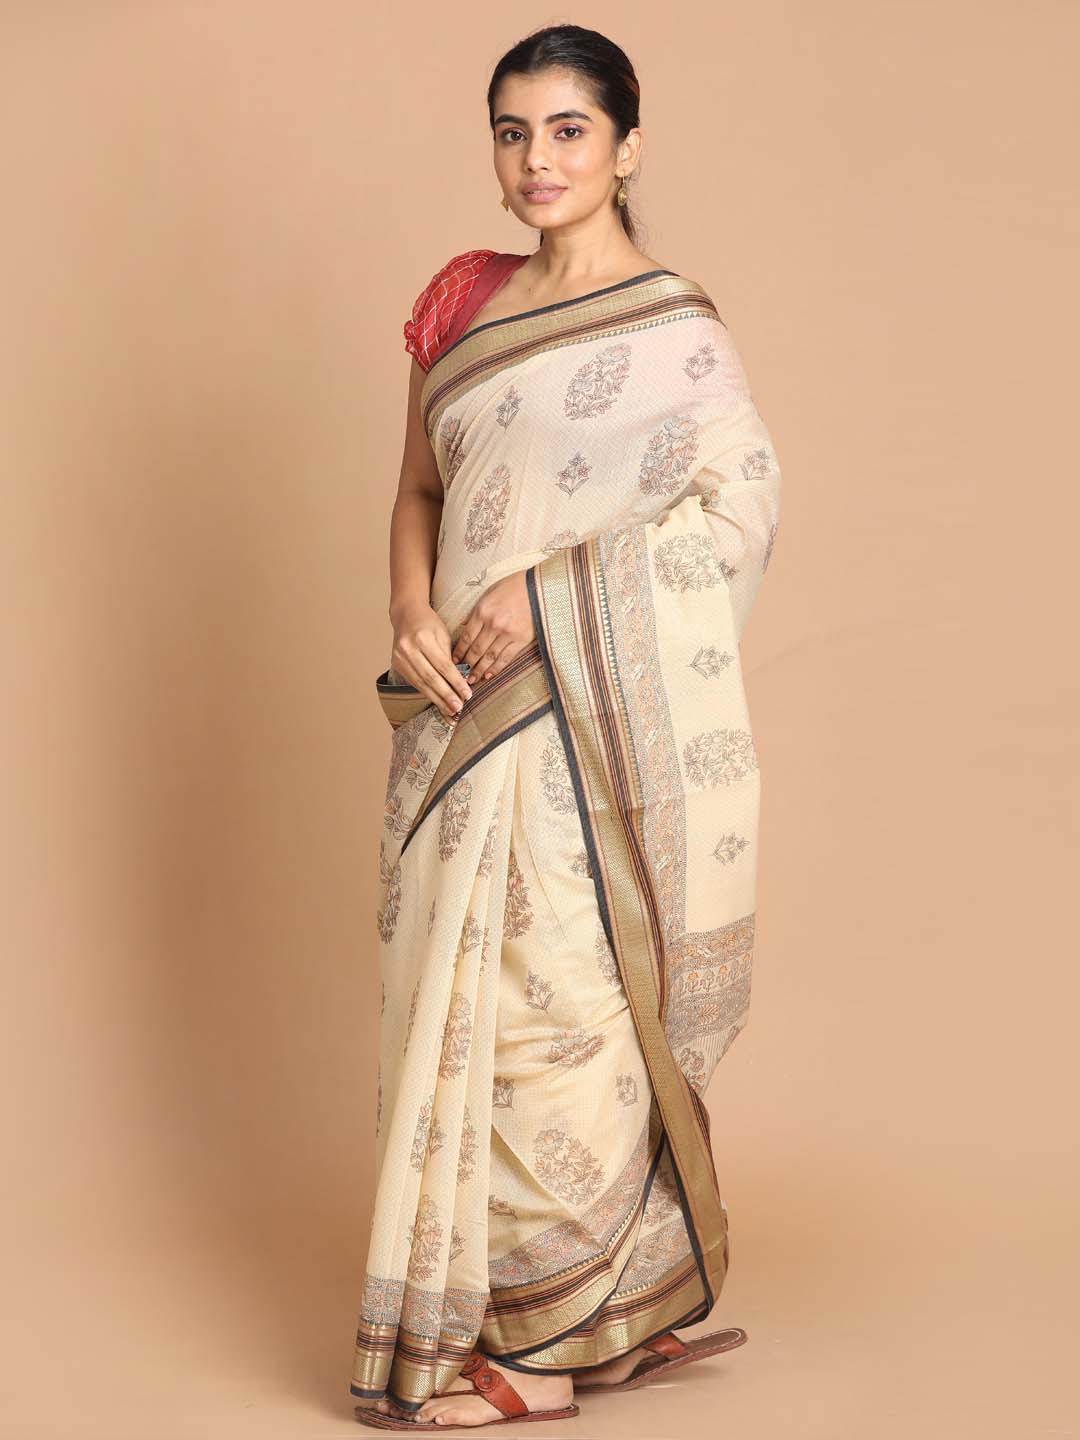 Indethnic Printed Cotton Blend Saree in Black - View 1